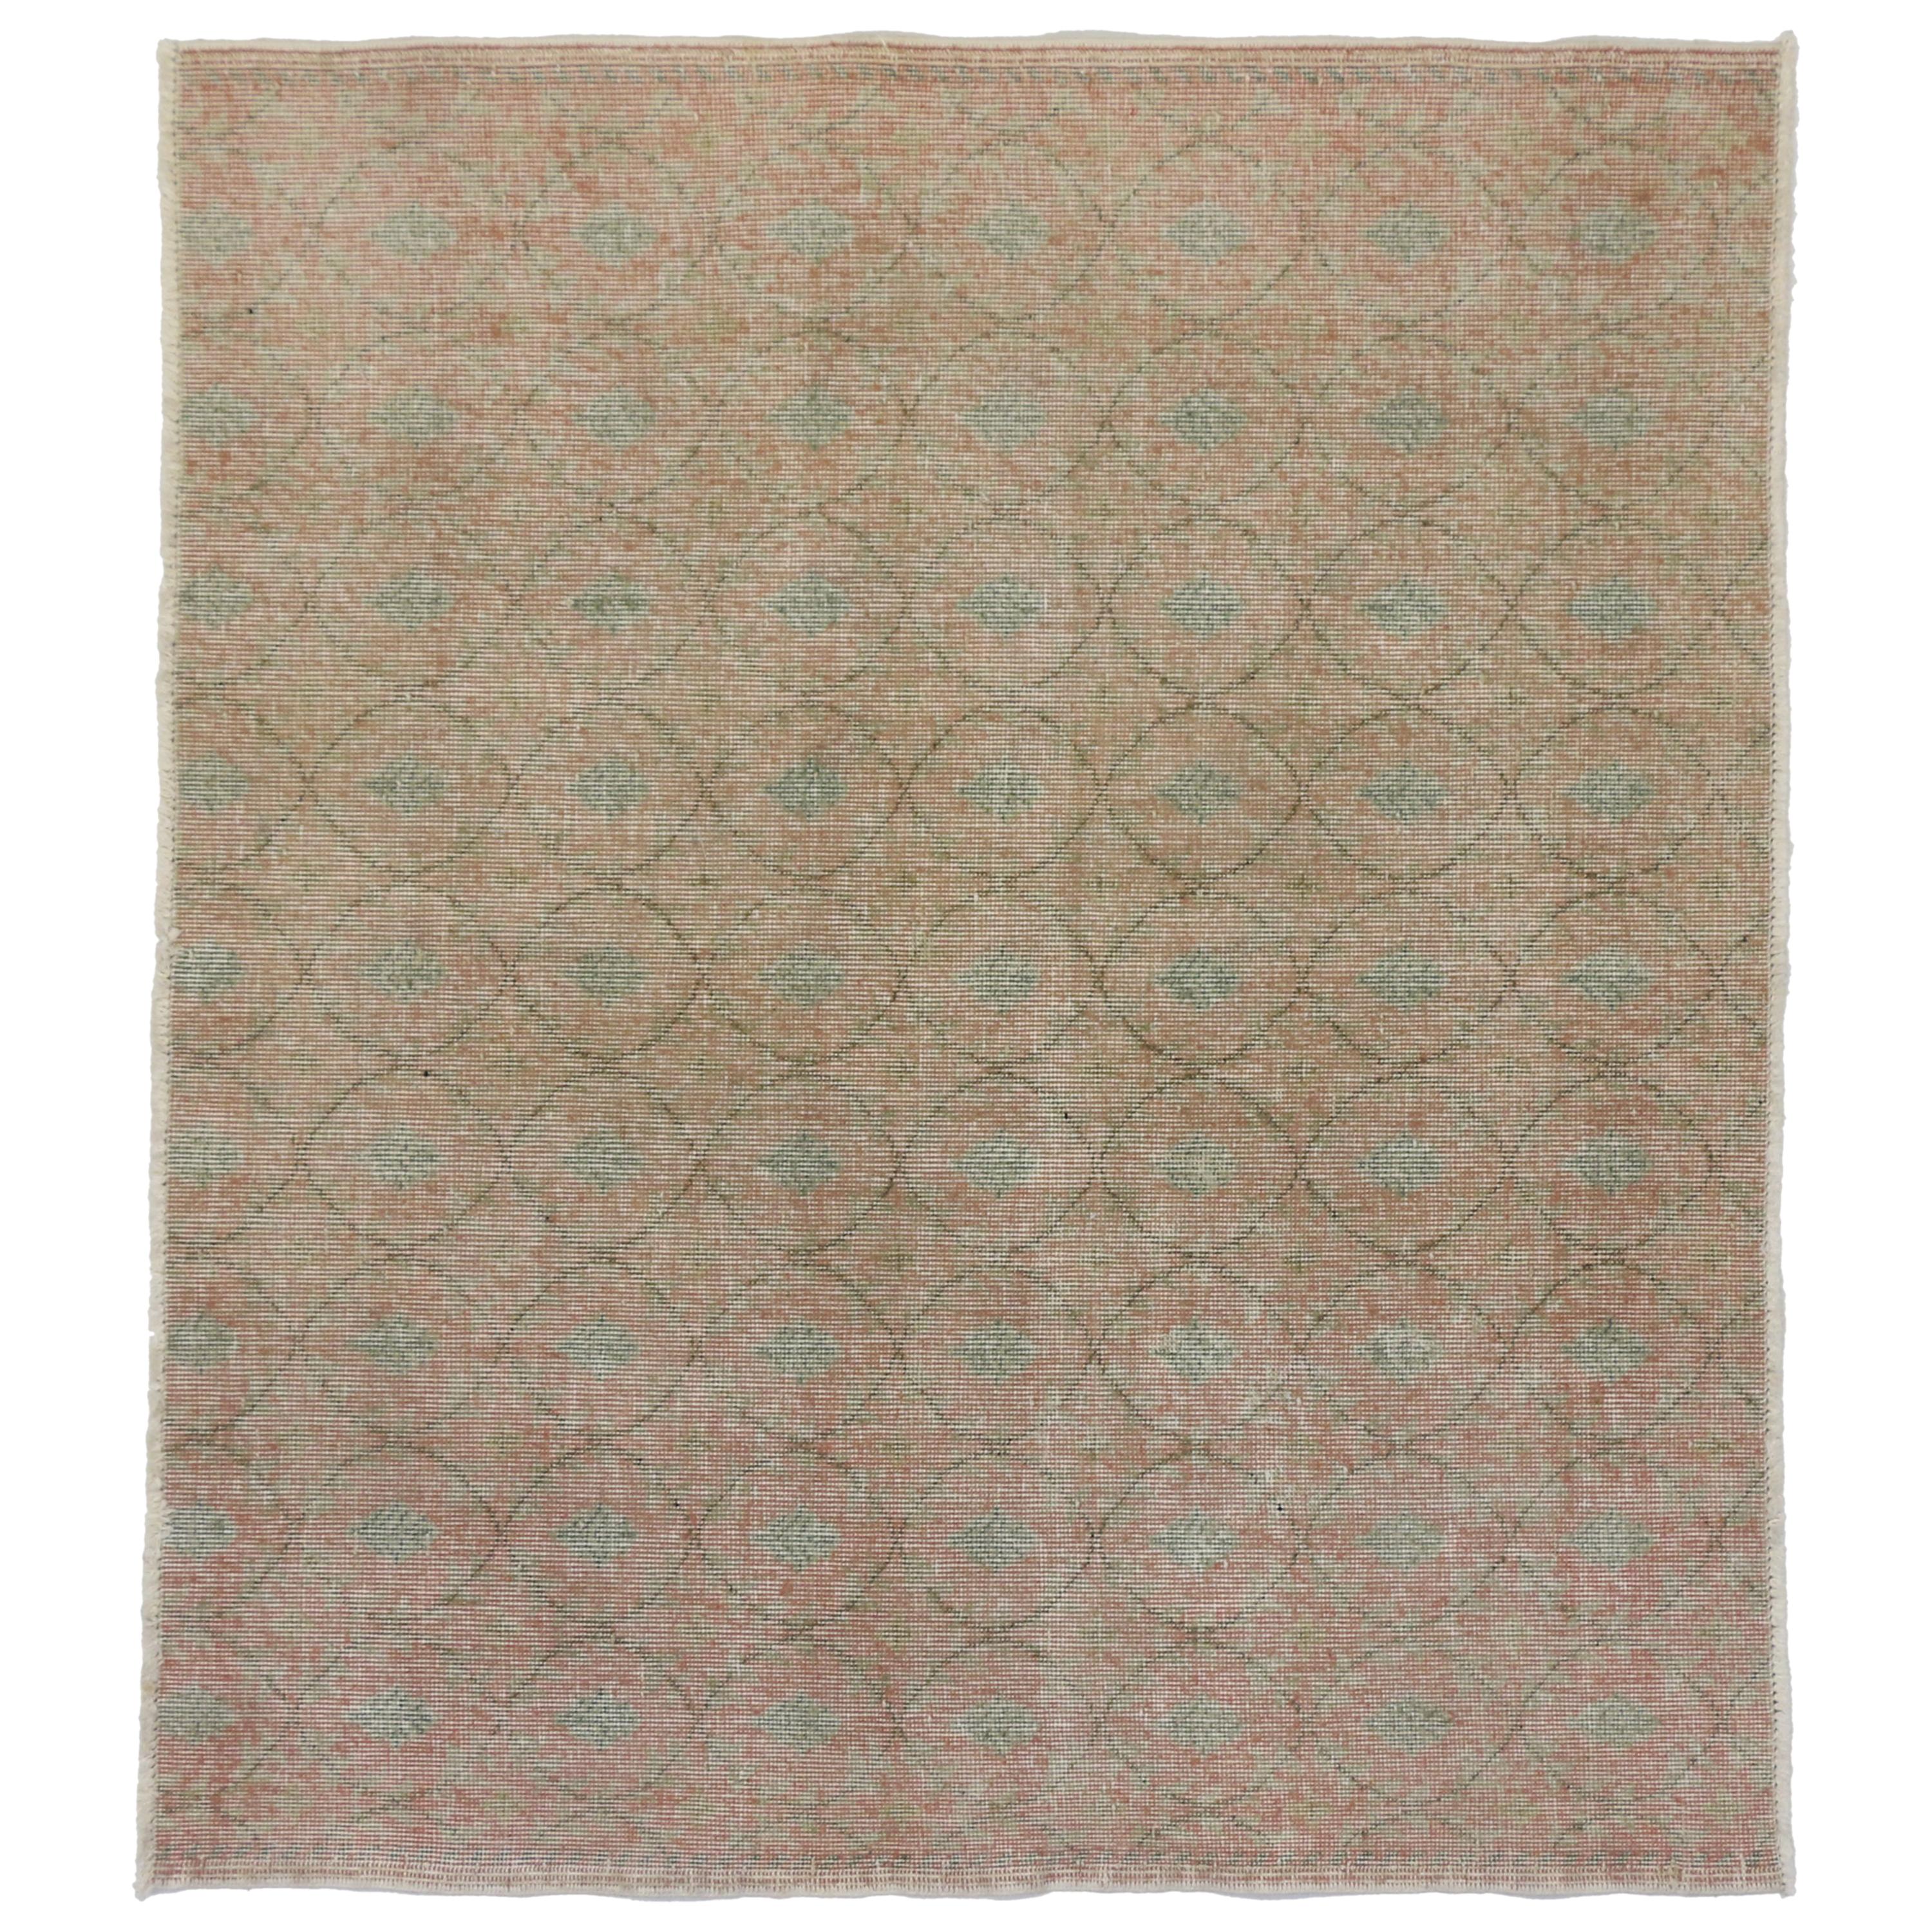 Distressed Vintage Turkish Sivas Rug with Shabby Chic Rustic Farmhouse Style For Sale